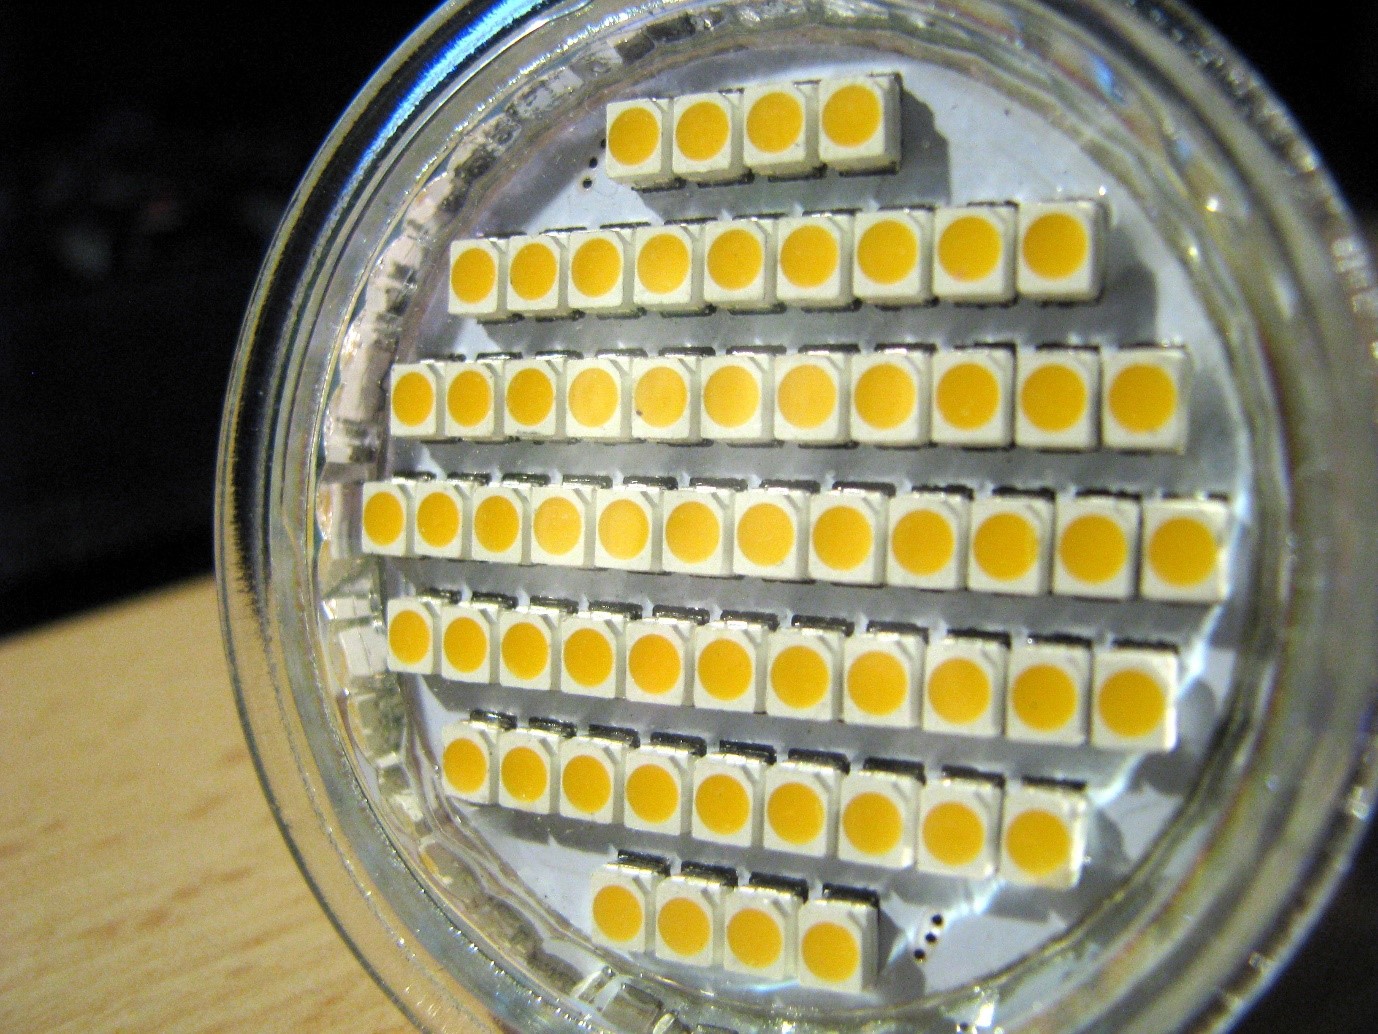 IMAGE: Close up of a cluster of LED ‘chips’ (yellow circles) in the lamp. These LED chips are combined in a variety of clusters to produce light for specific requirements. Intensity (lumens) and quality of light are considered in the design of LED lighting. Credit: pixabay.com